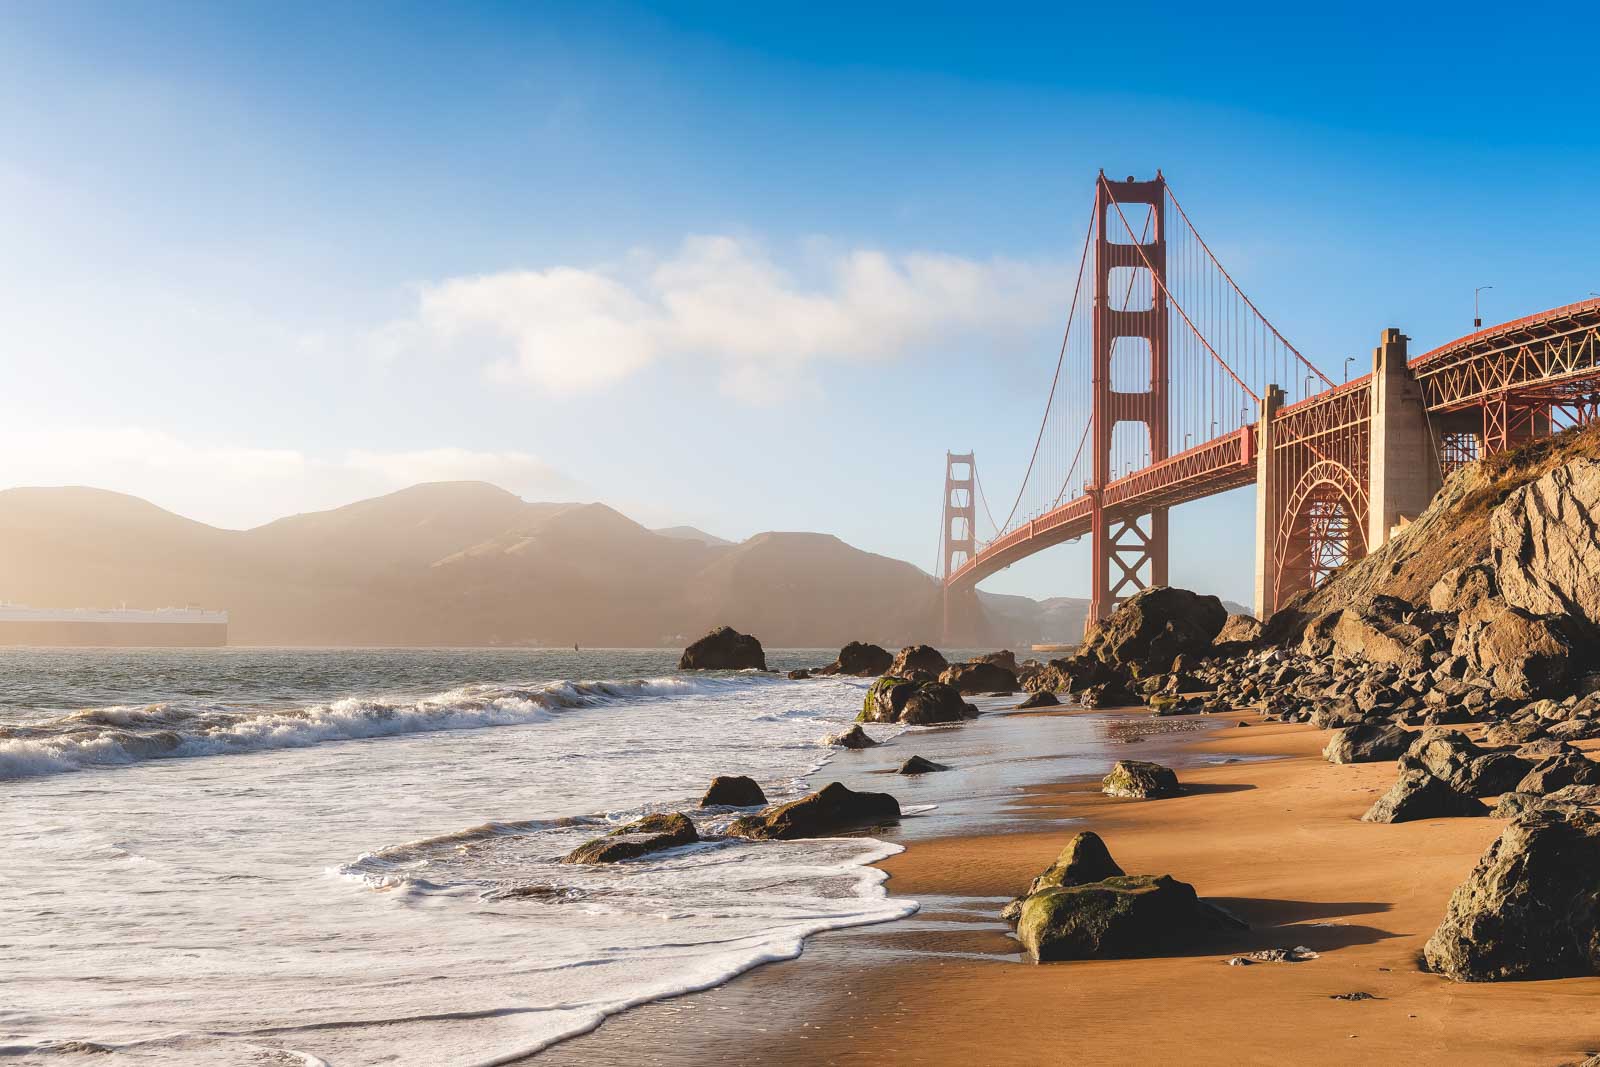 A viewpoint of the Golden Gate Bridge from Marshall's Beach at golden hour.